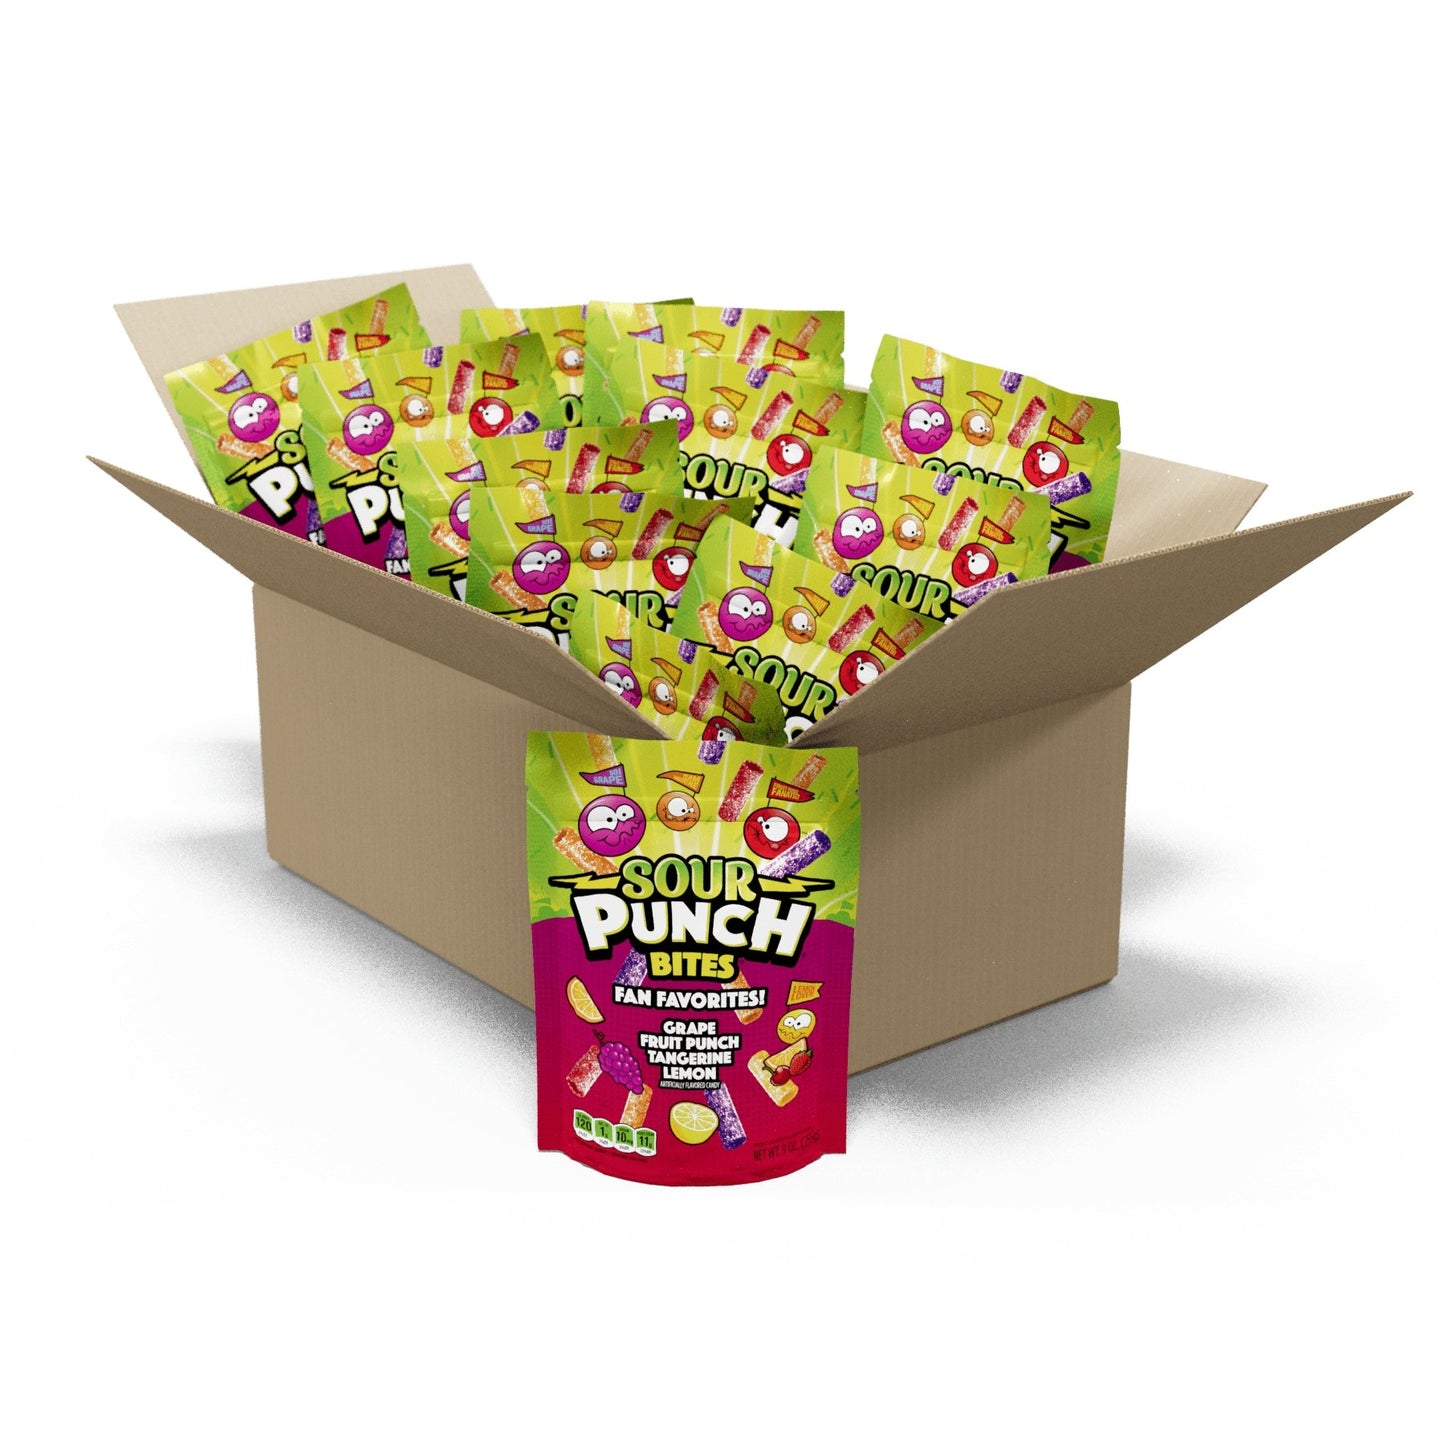 12 count box of Sour Punch Bites Fan Favorites Candy 9oz bags